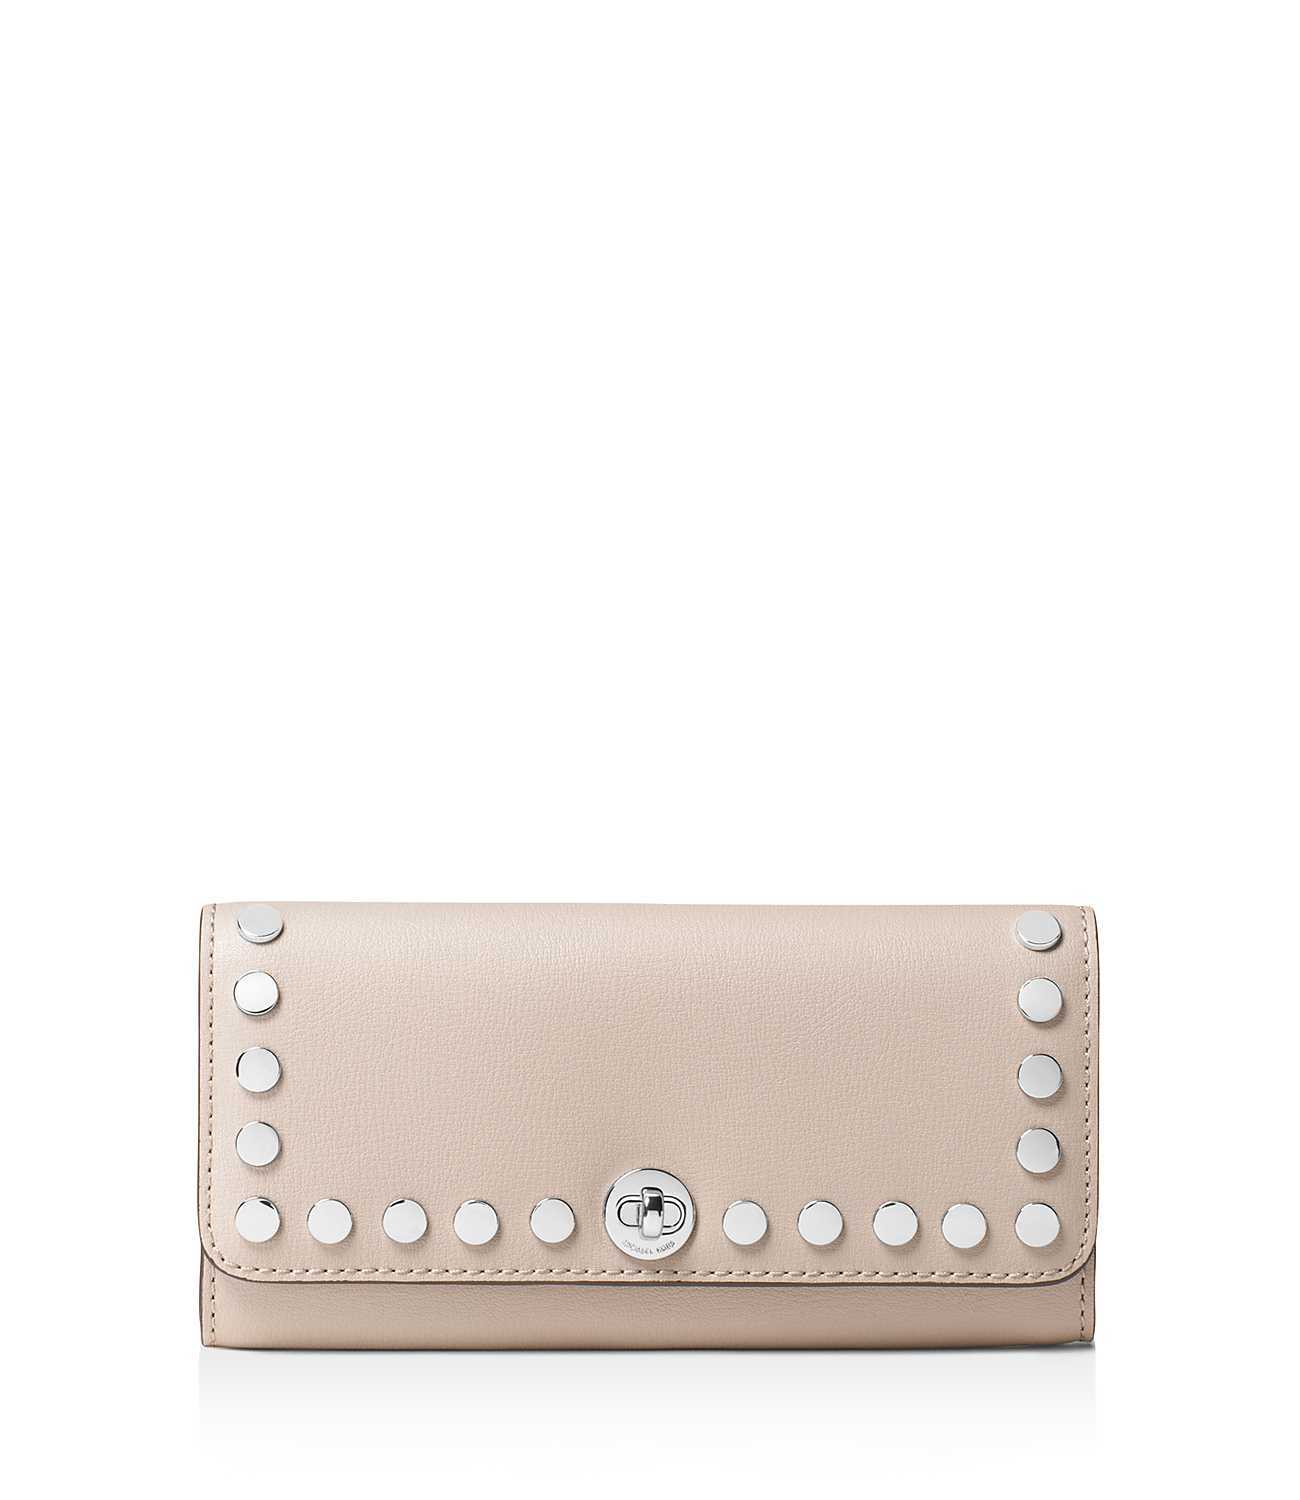  MICHAEL Michael Kors Womens Rivington Leather Studded Organizer  Wallet Gray O/S : Clothing, Shoes & Jewelry